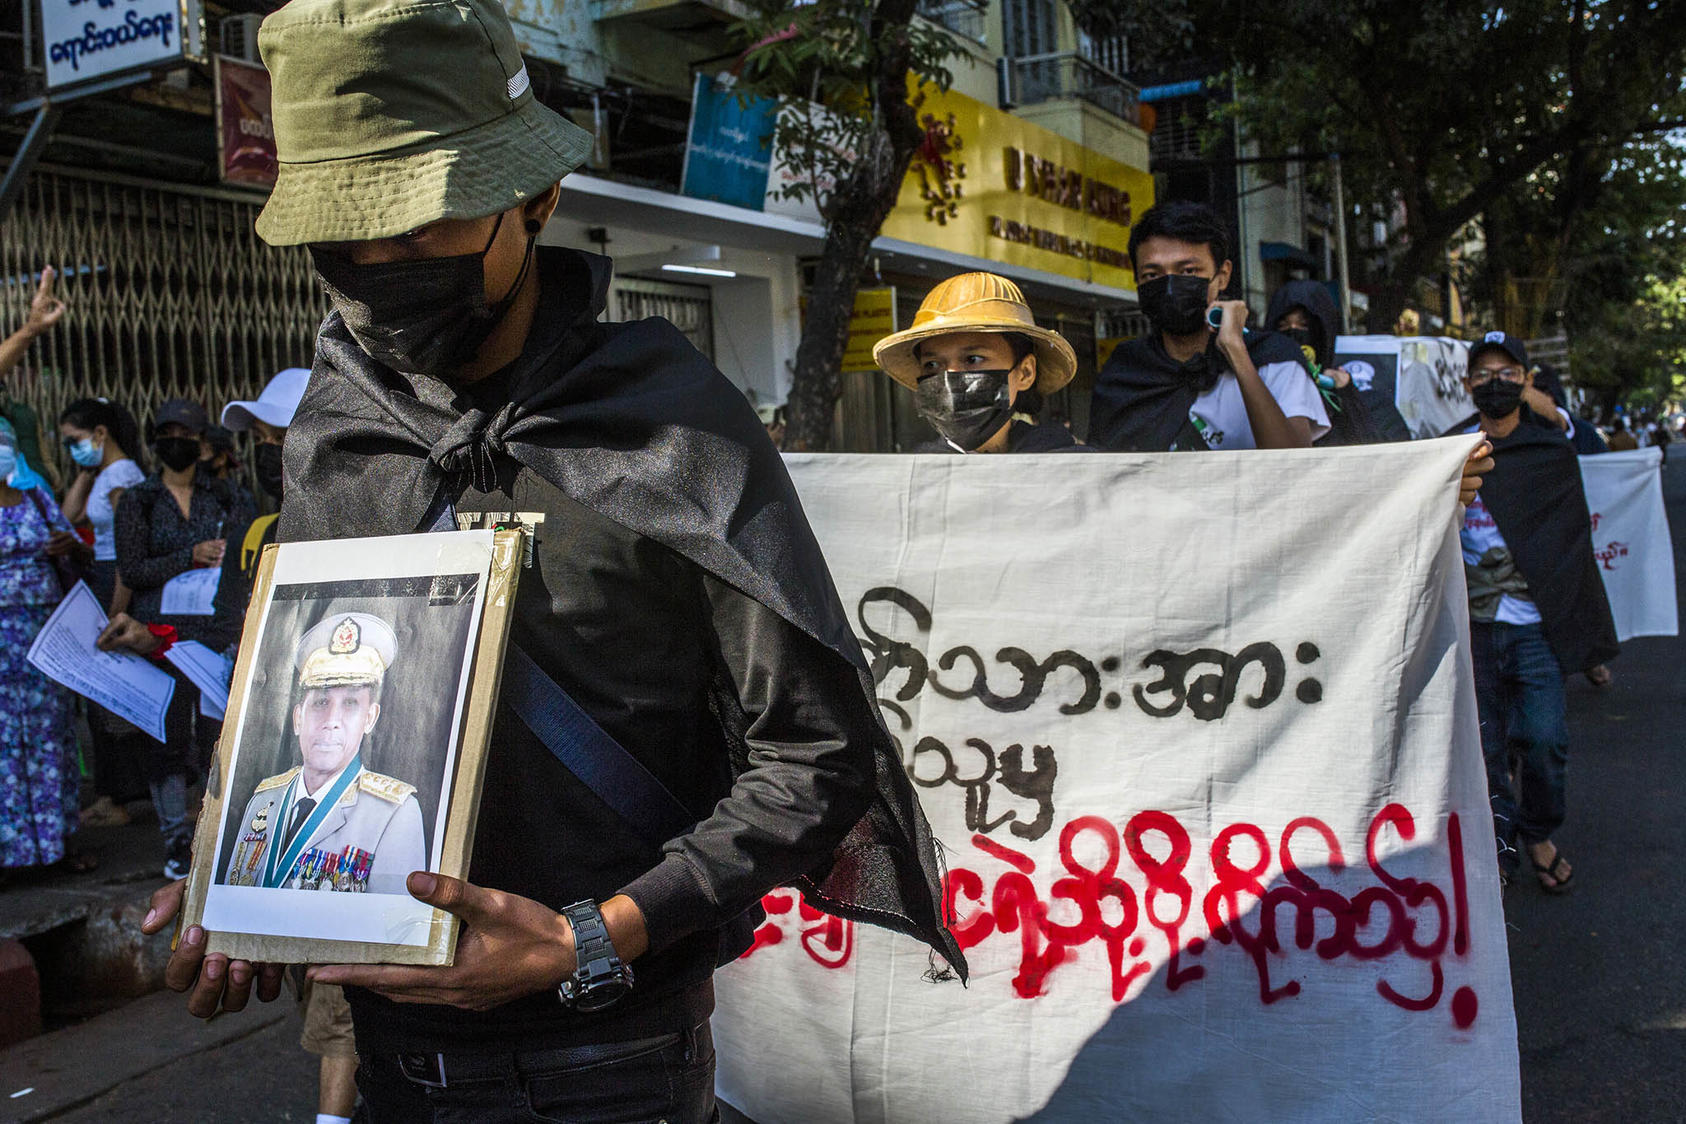 Protesters in Yangon, Myanmar, stage a faux "funeral" for coup leader Gen. Min Aung Hlaing, on Feb. 10, 2021, days after the coup. (The New York Times)